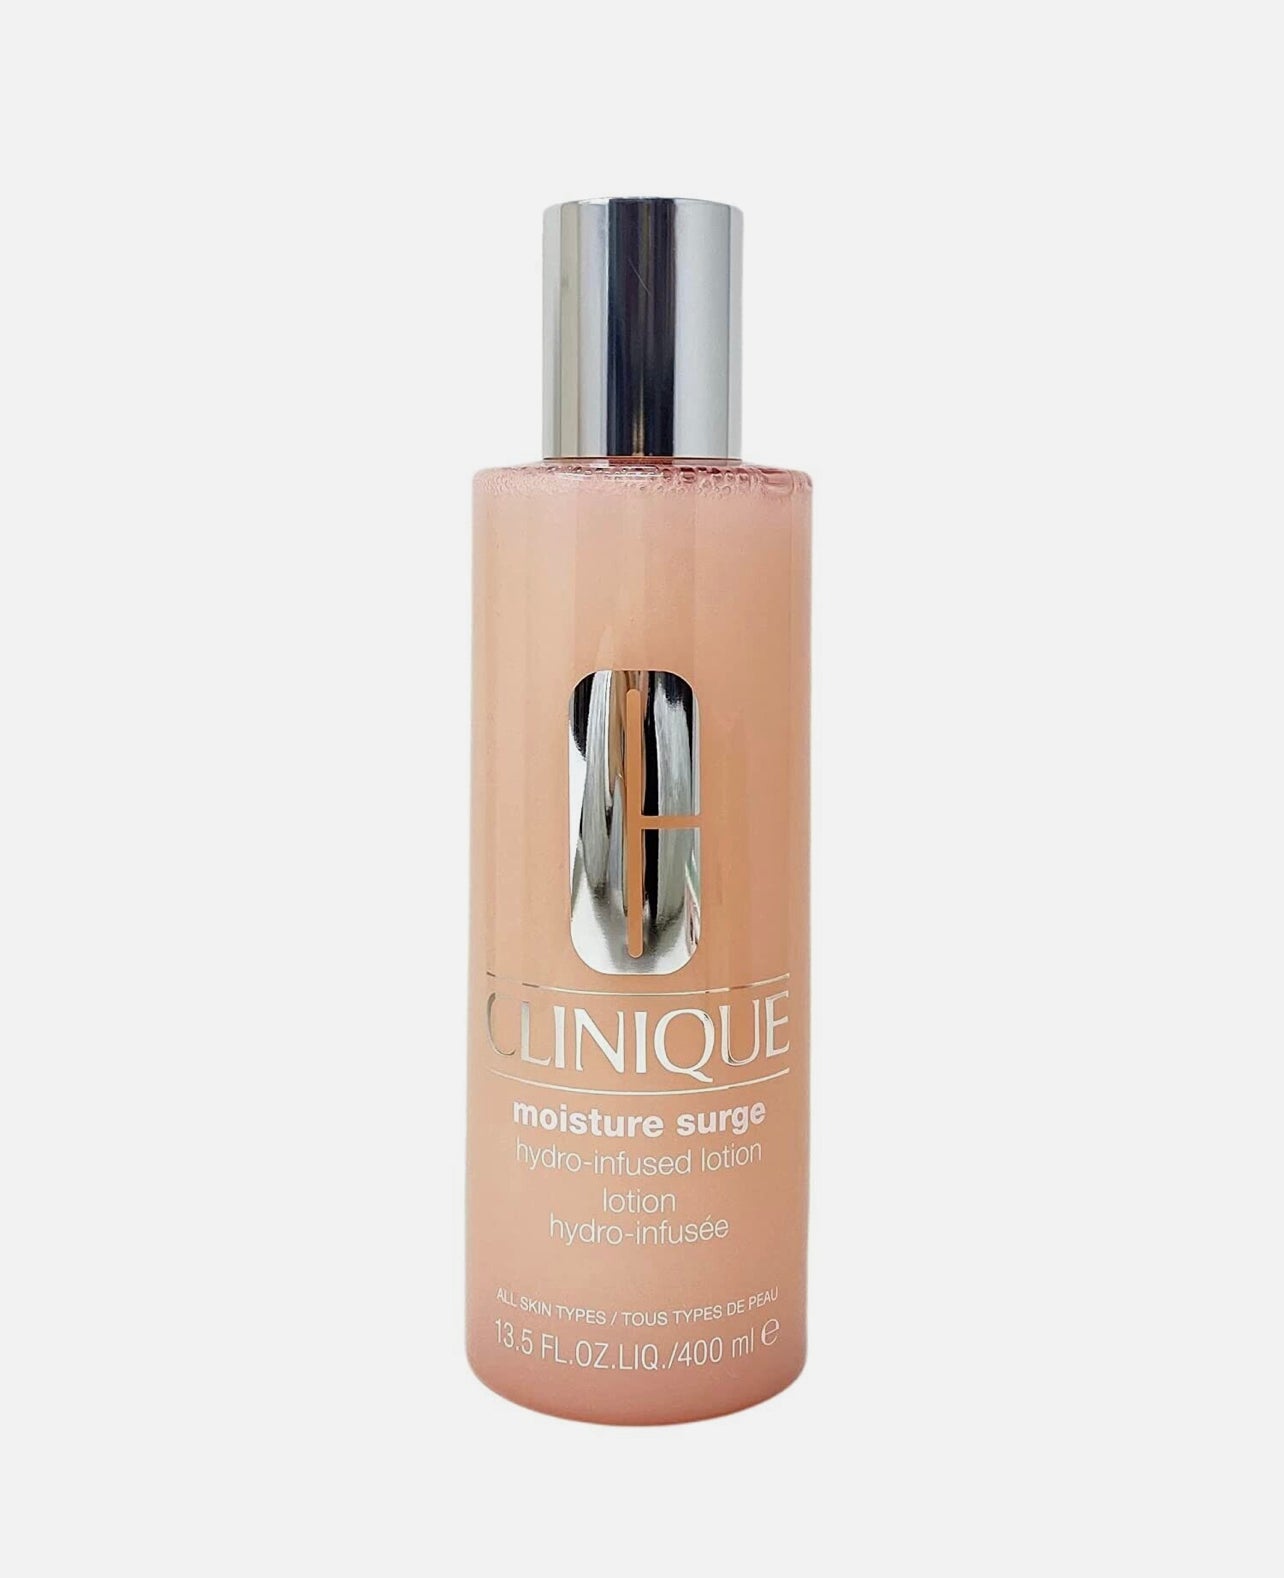 Clinique Moisture Surge 100H Set Hydrator Hydro Infused Lotion Eye Concentrate